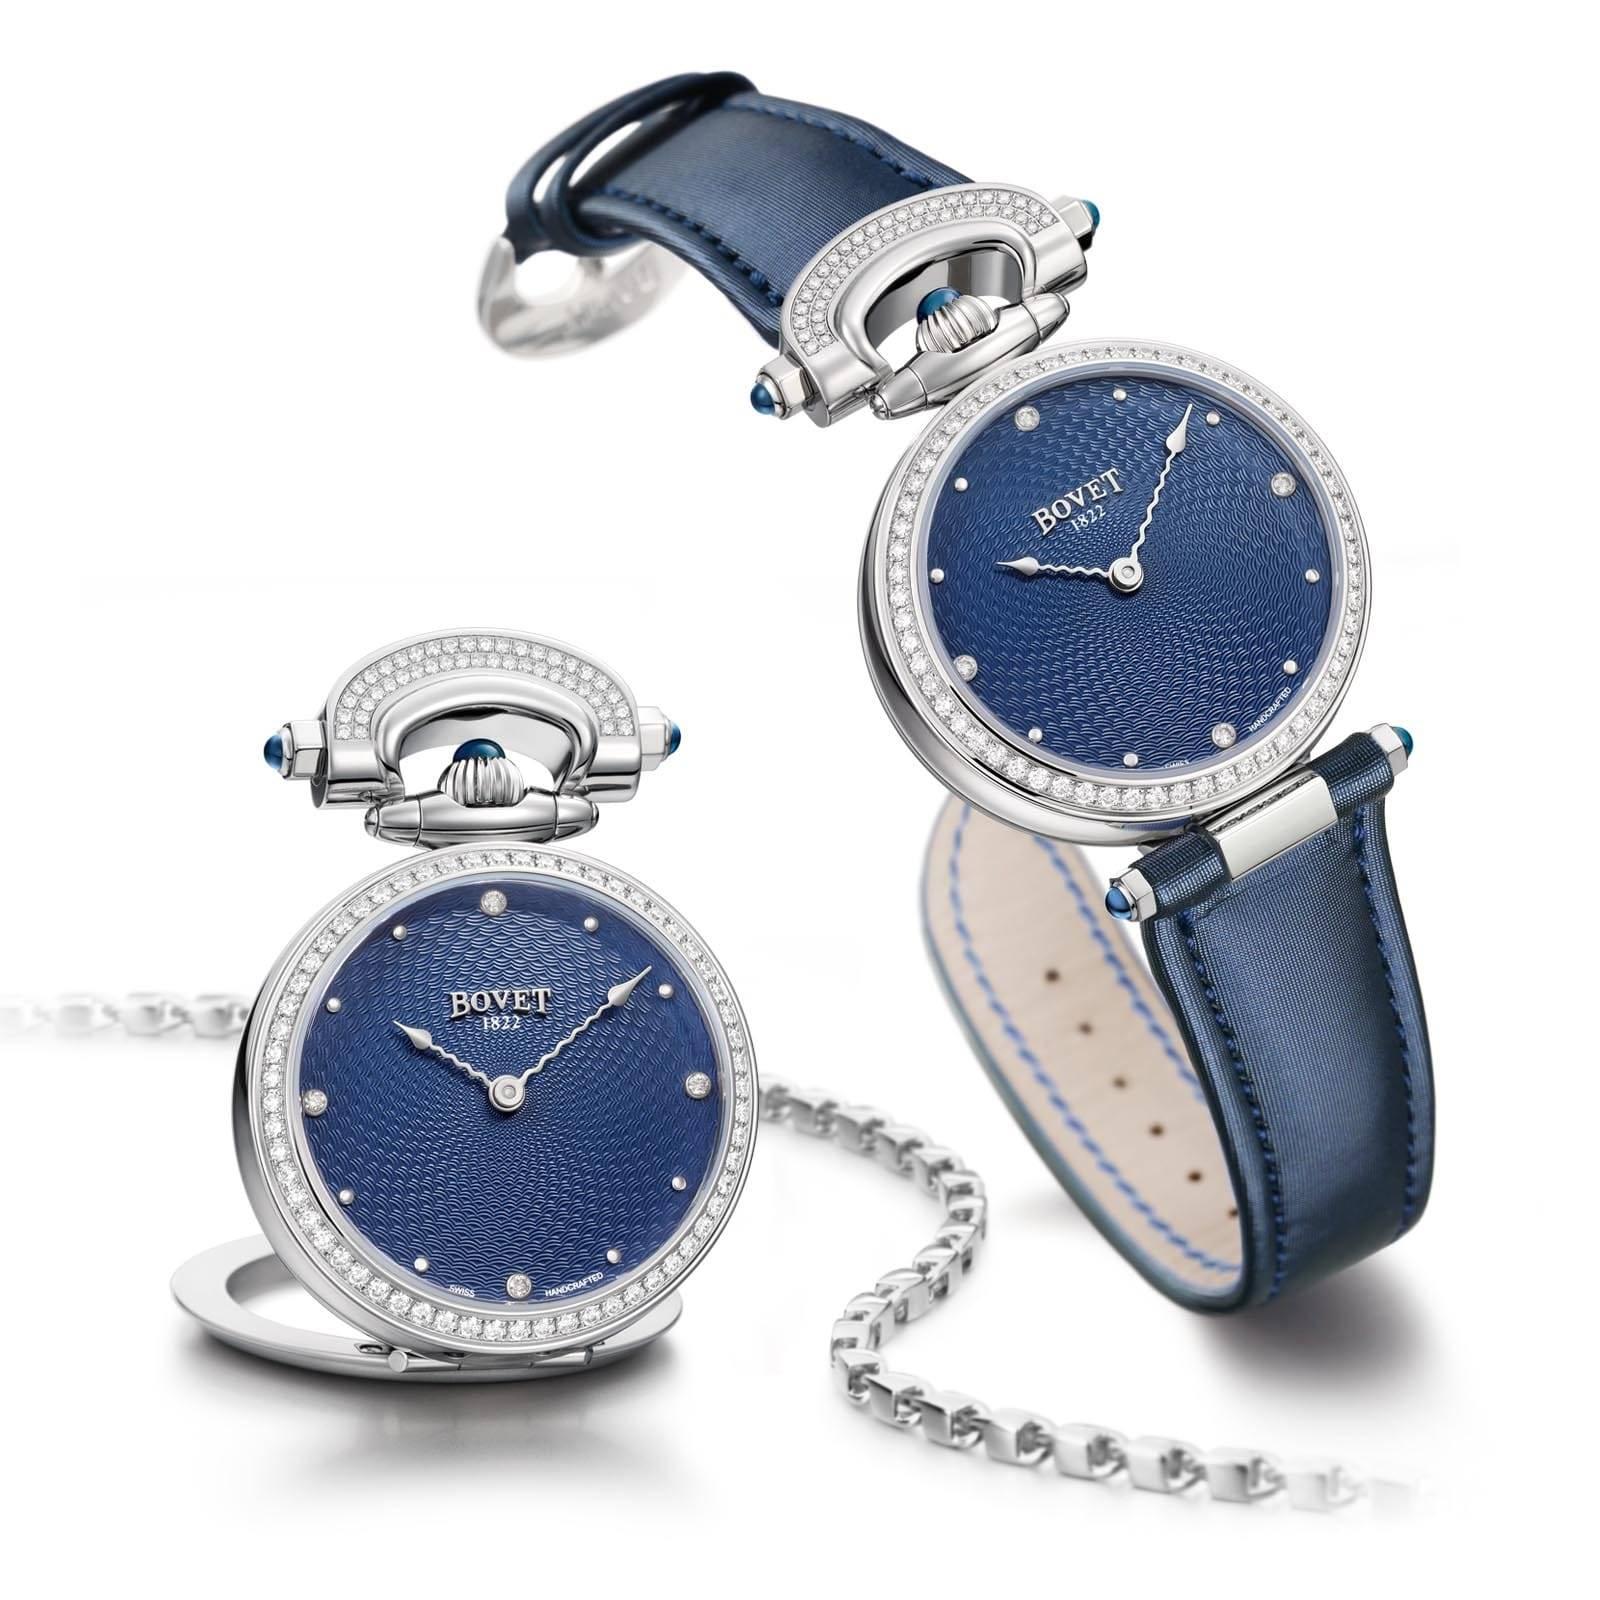 A brand new Bovet 1822 Miss Audrey round stainless steel and diamonds lady convertible wristwatch and pocket watch

Amadeo® convertible system - fully Integrated Convertible Case (wristwatch, pocket watch, table clock)
The Amadeo® case allows the